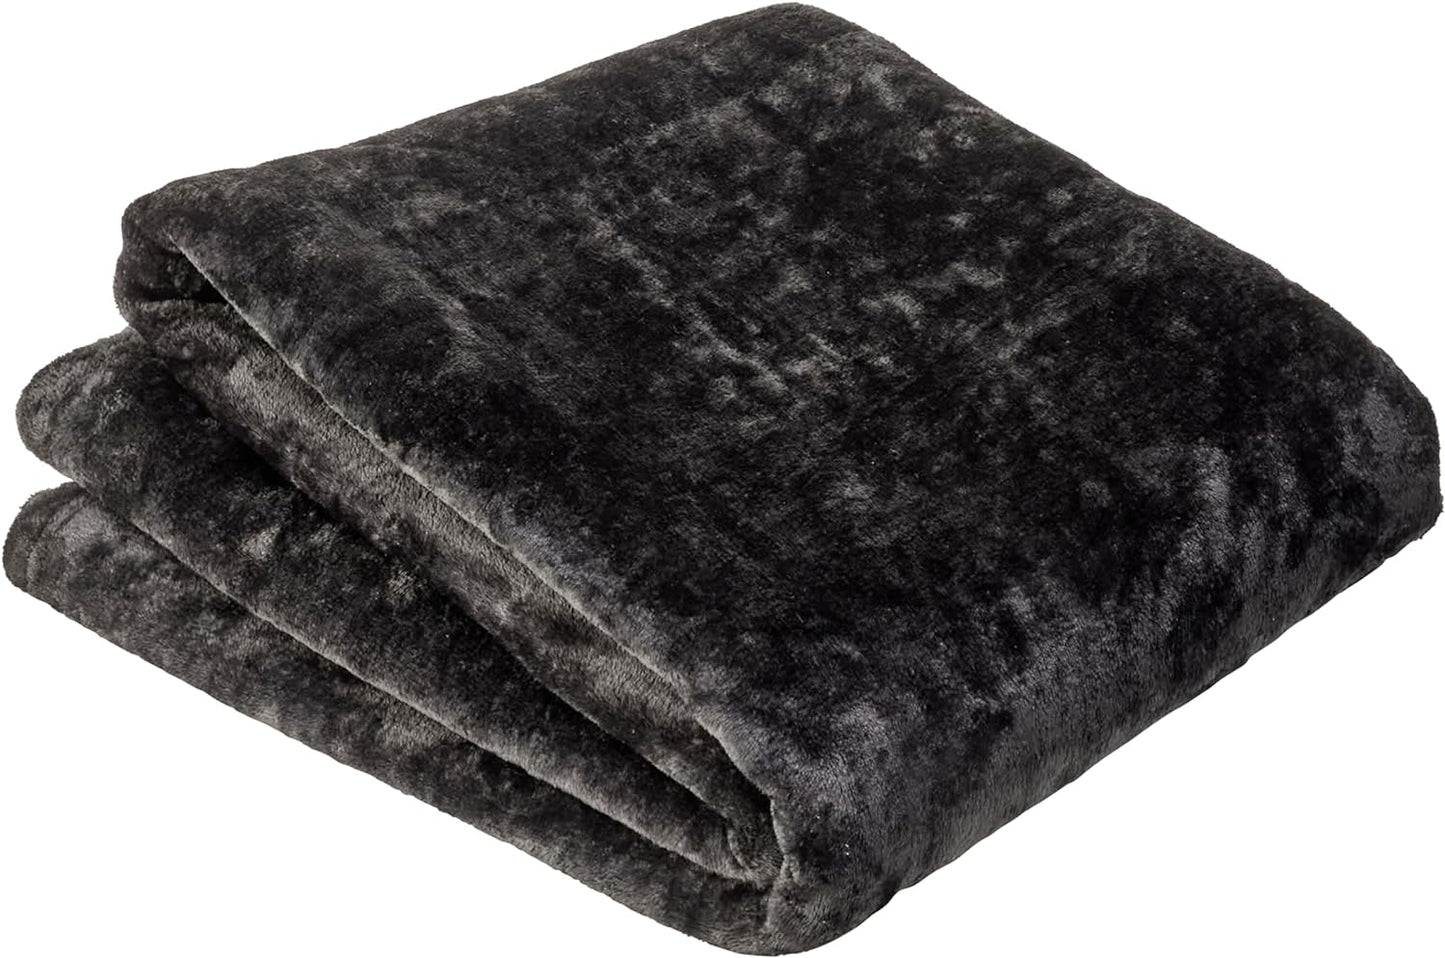 Flannel Fleece Throw Blanket Super Soft Warm Fluffy For Bed Sofa Couch Chair OLIVIA ROCCO Throw